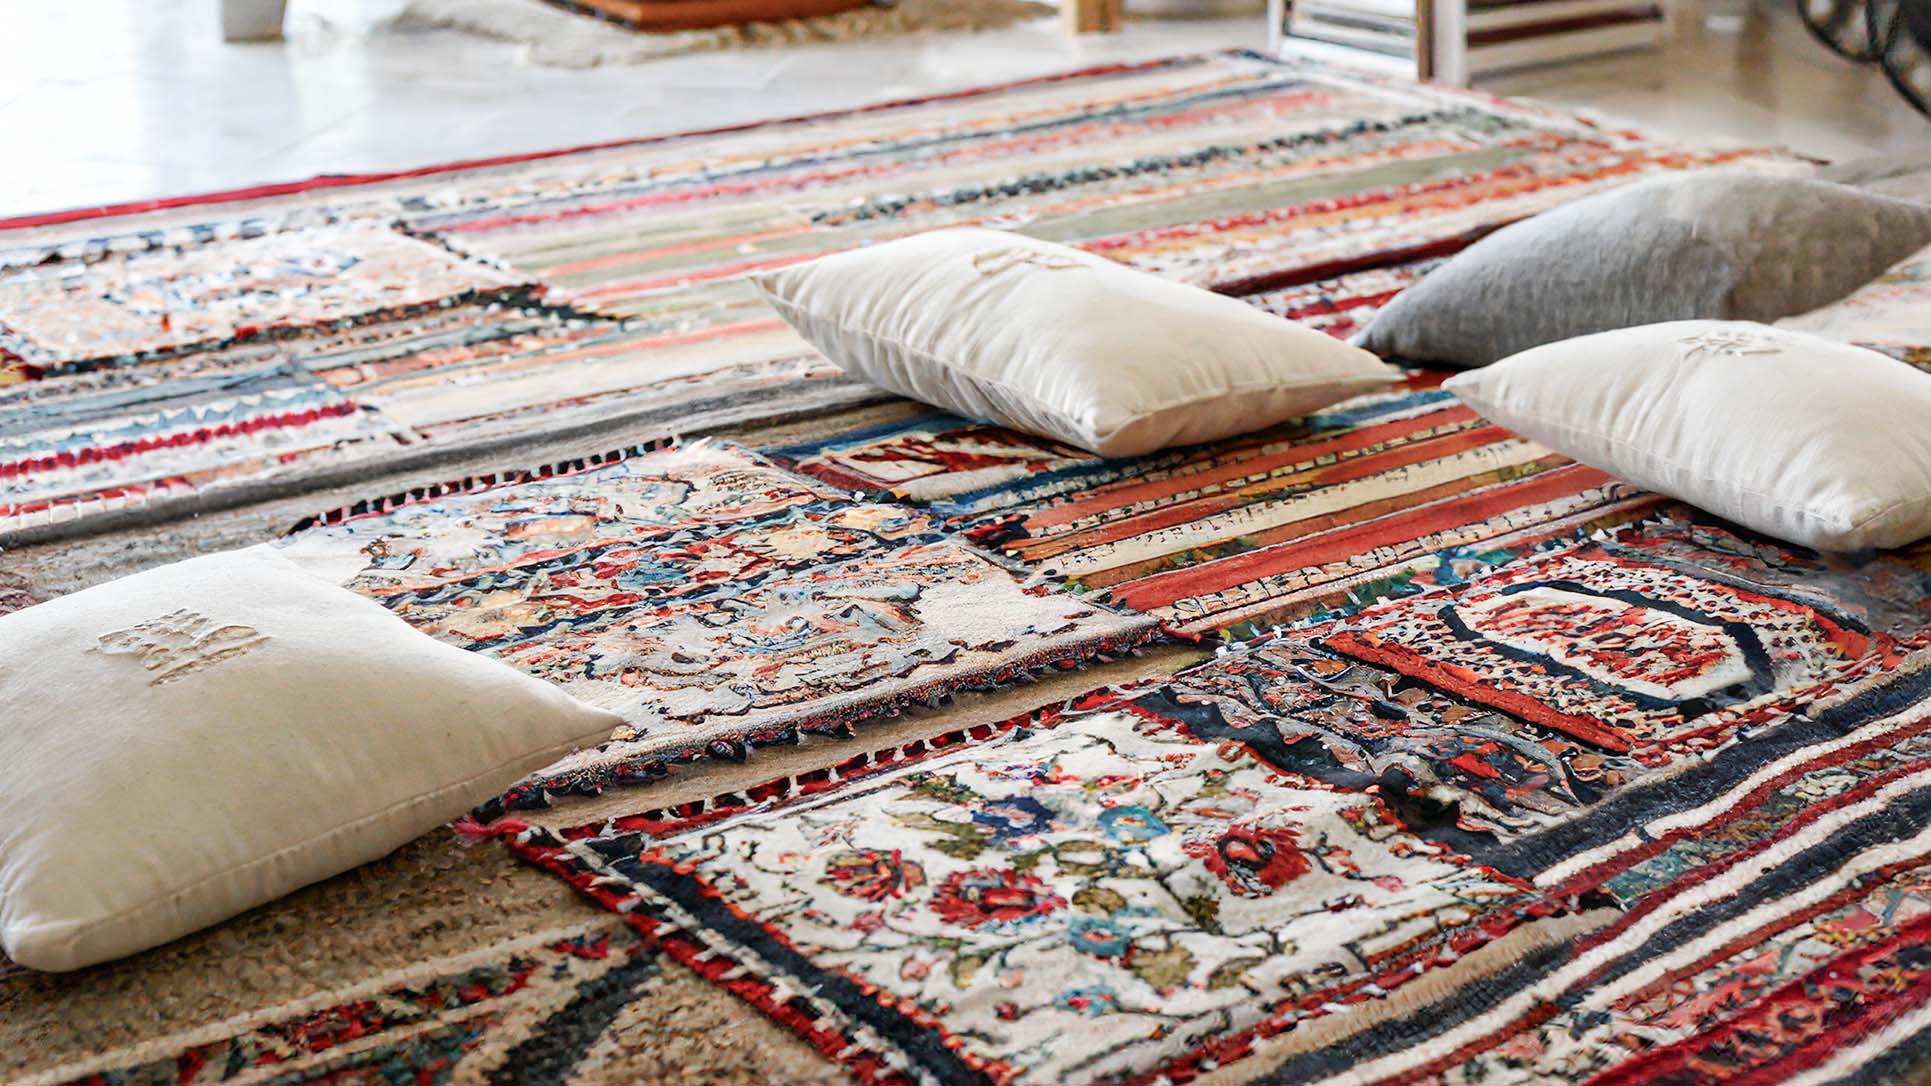 Turkish kilim rugs and pillows arranged on floor in Turkish textile factory.